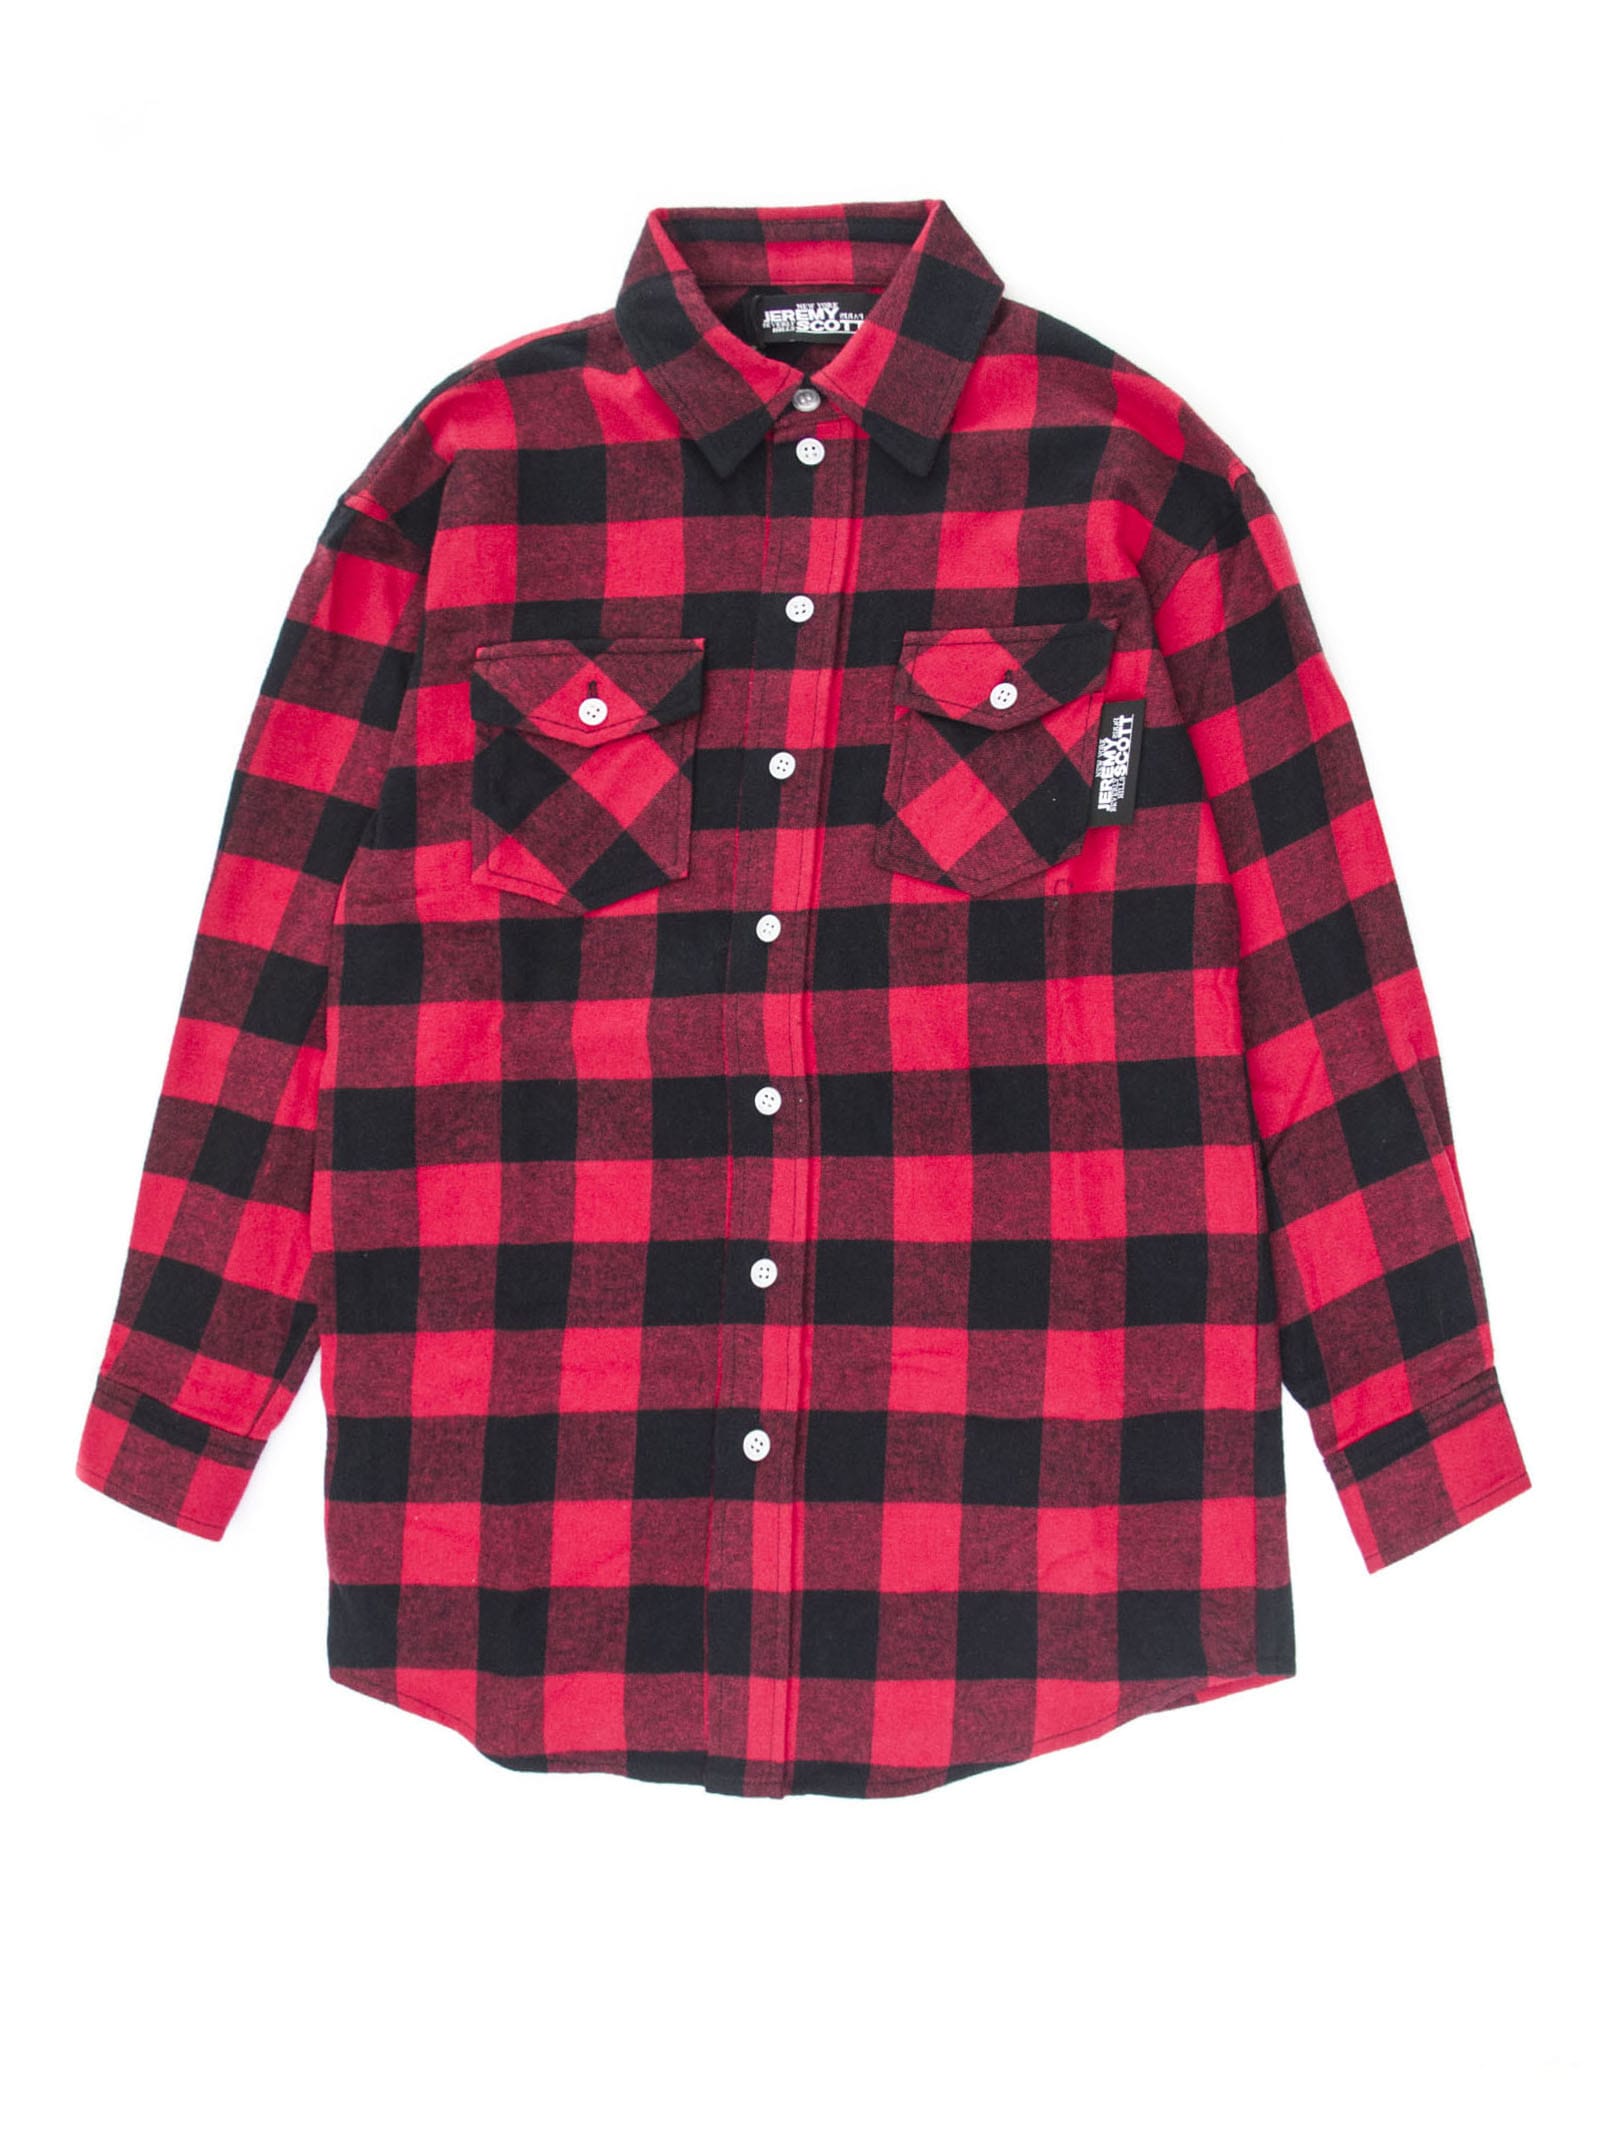 Jeremy Scott Black And Red Checked Shirt